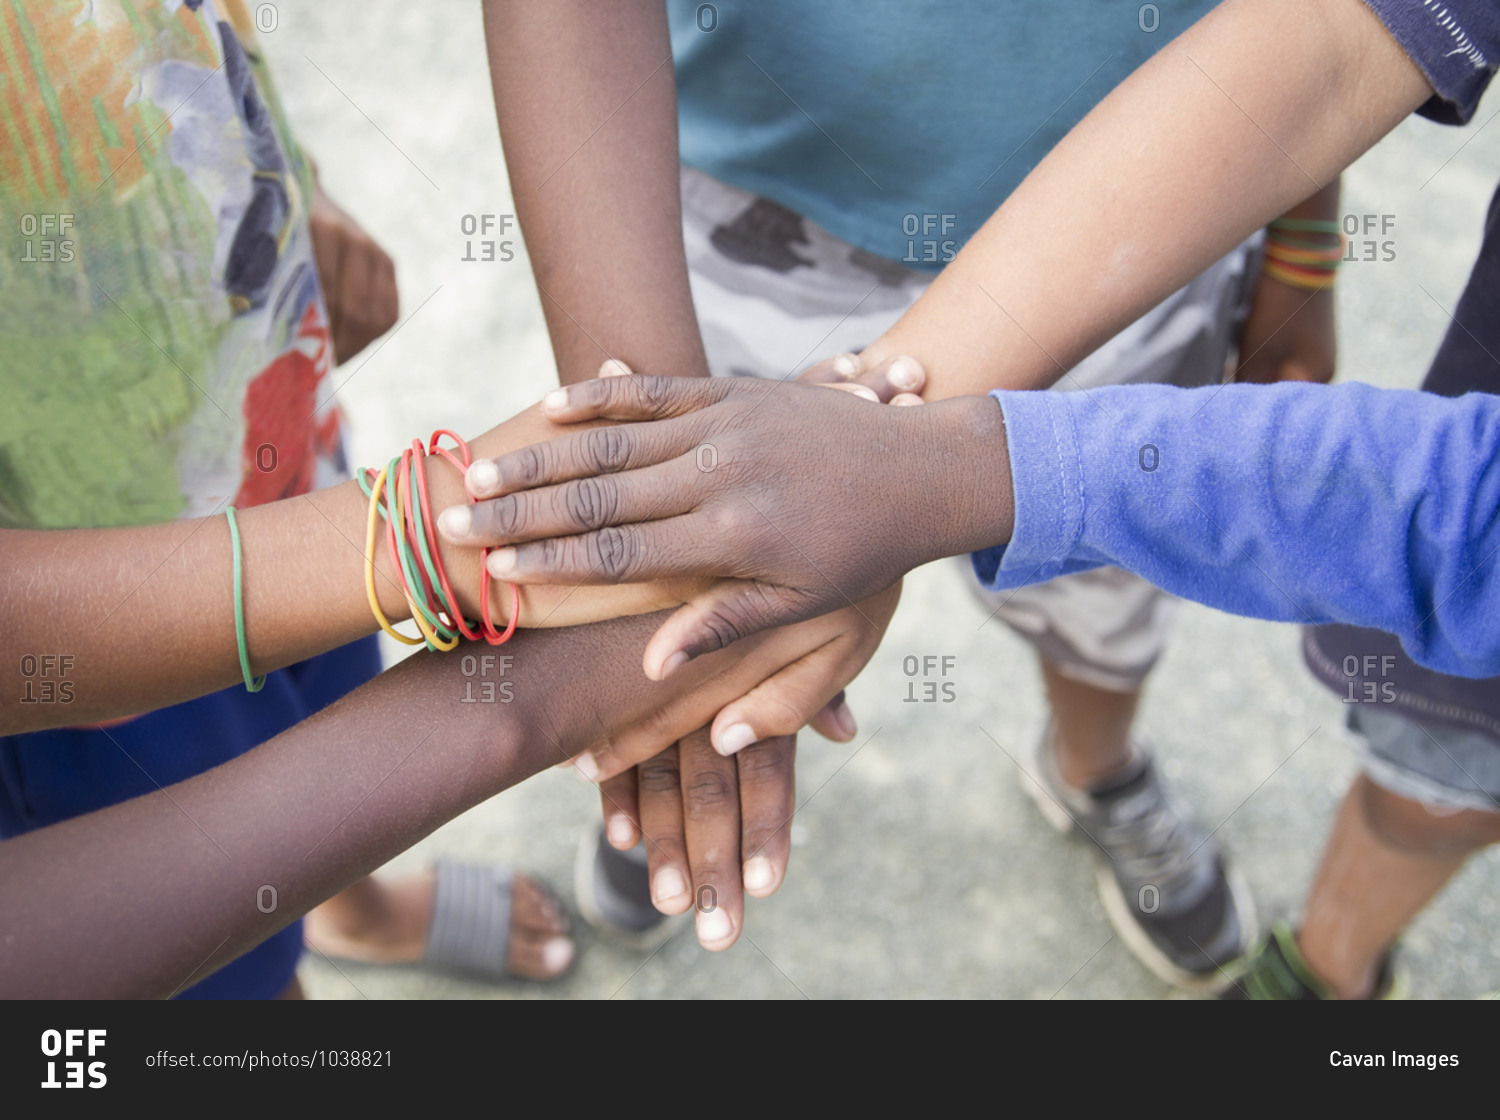 Anonymous group of children of various ethnicities putting their hands together